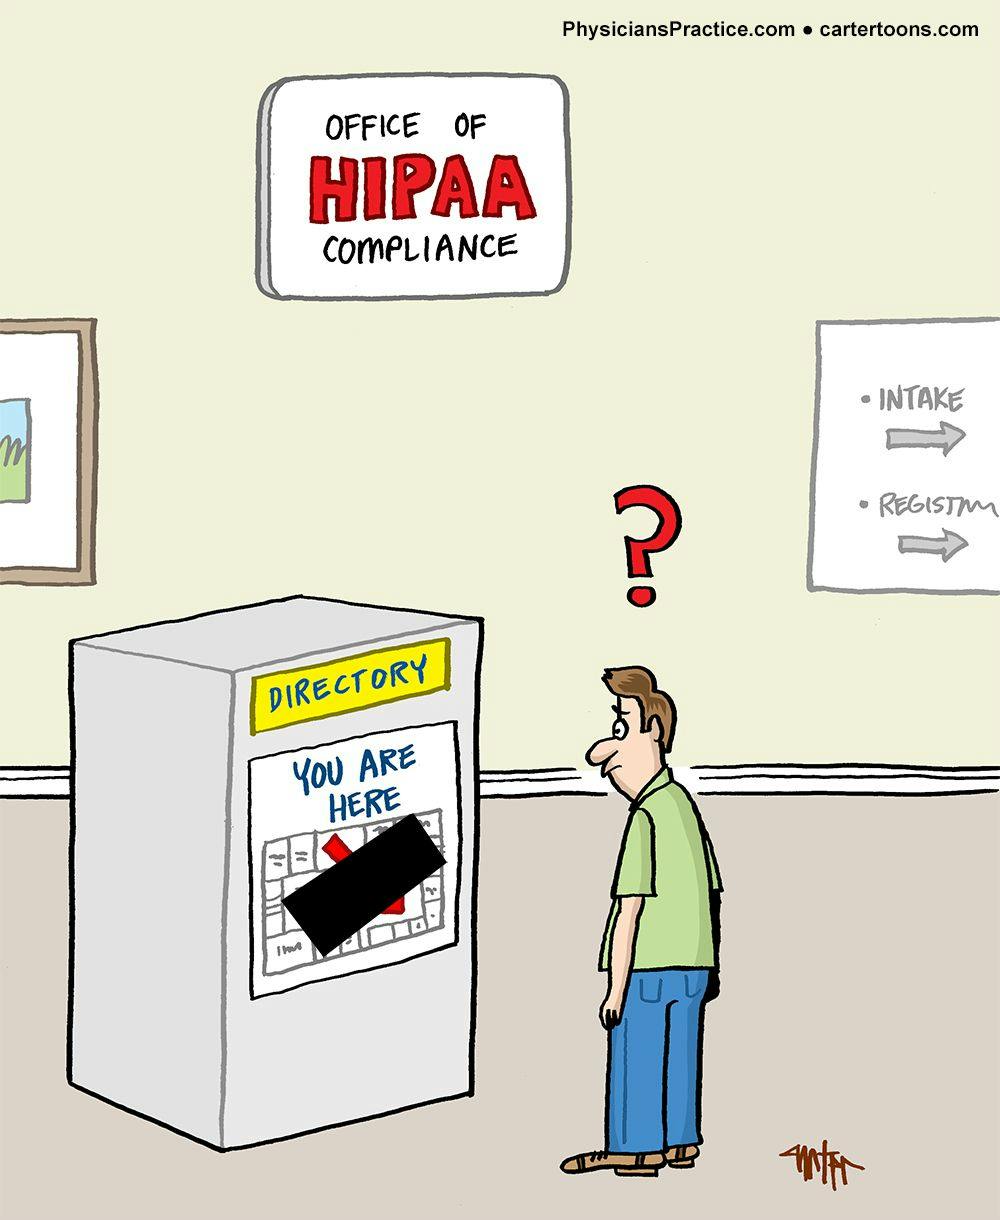 The Downside to HIPAA Compliance at this Practice